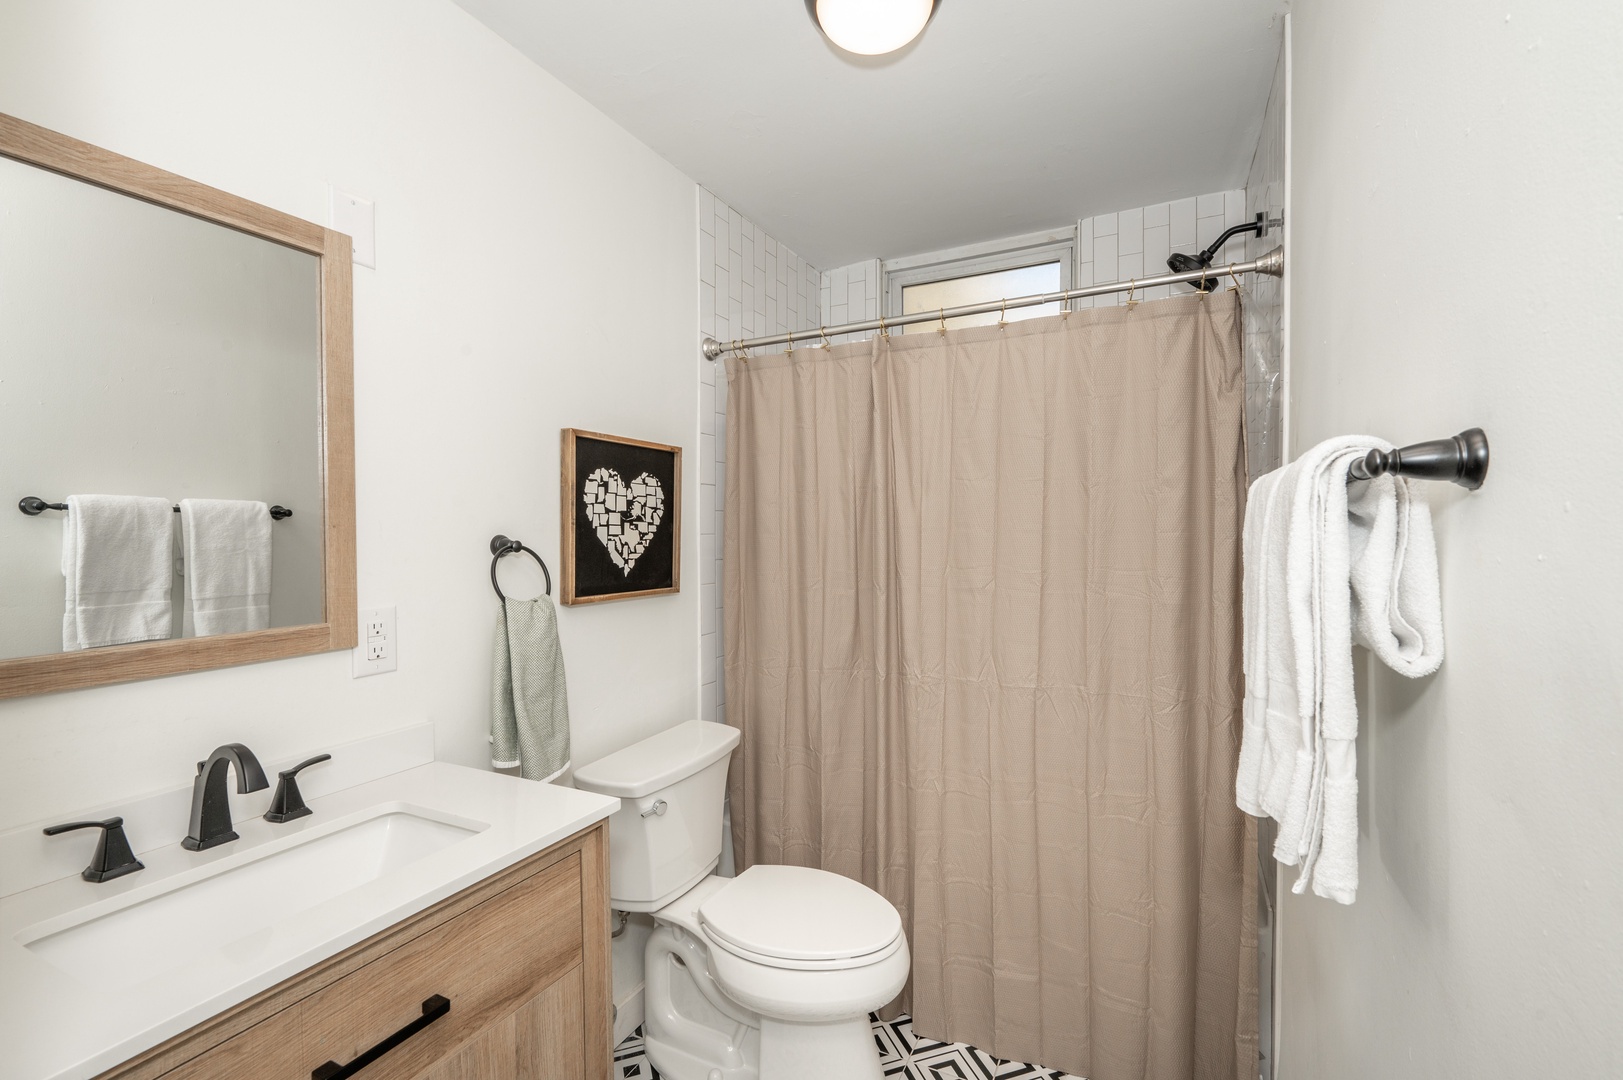 Apt 2 – The full bathroom includes a chic single vanity & shower/tub combo